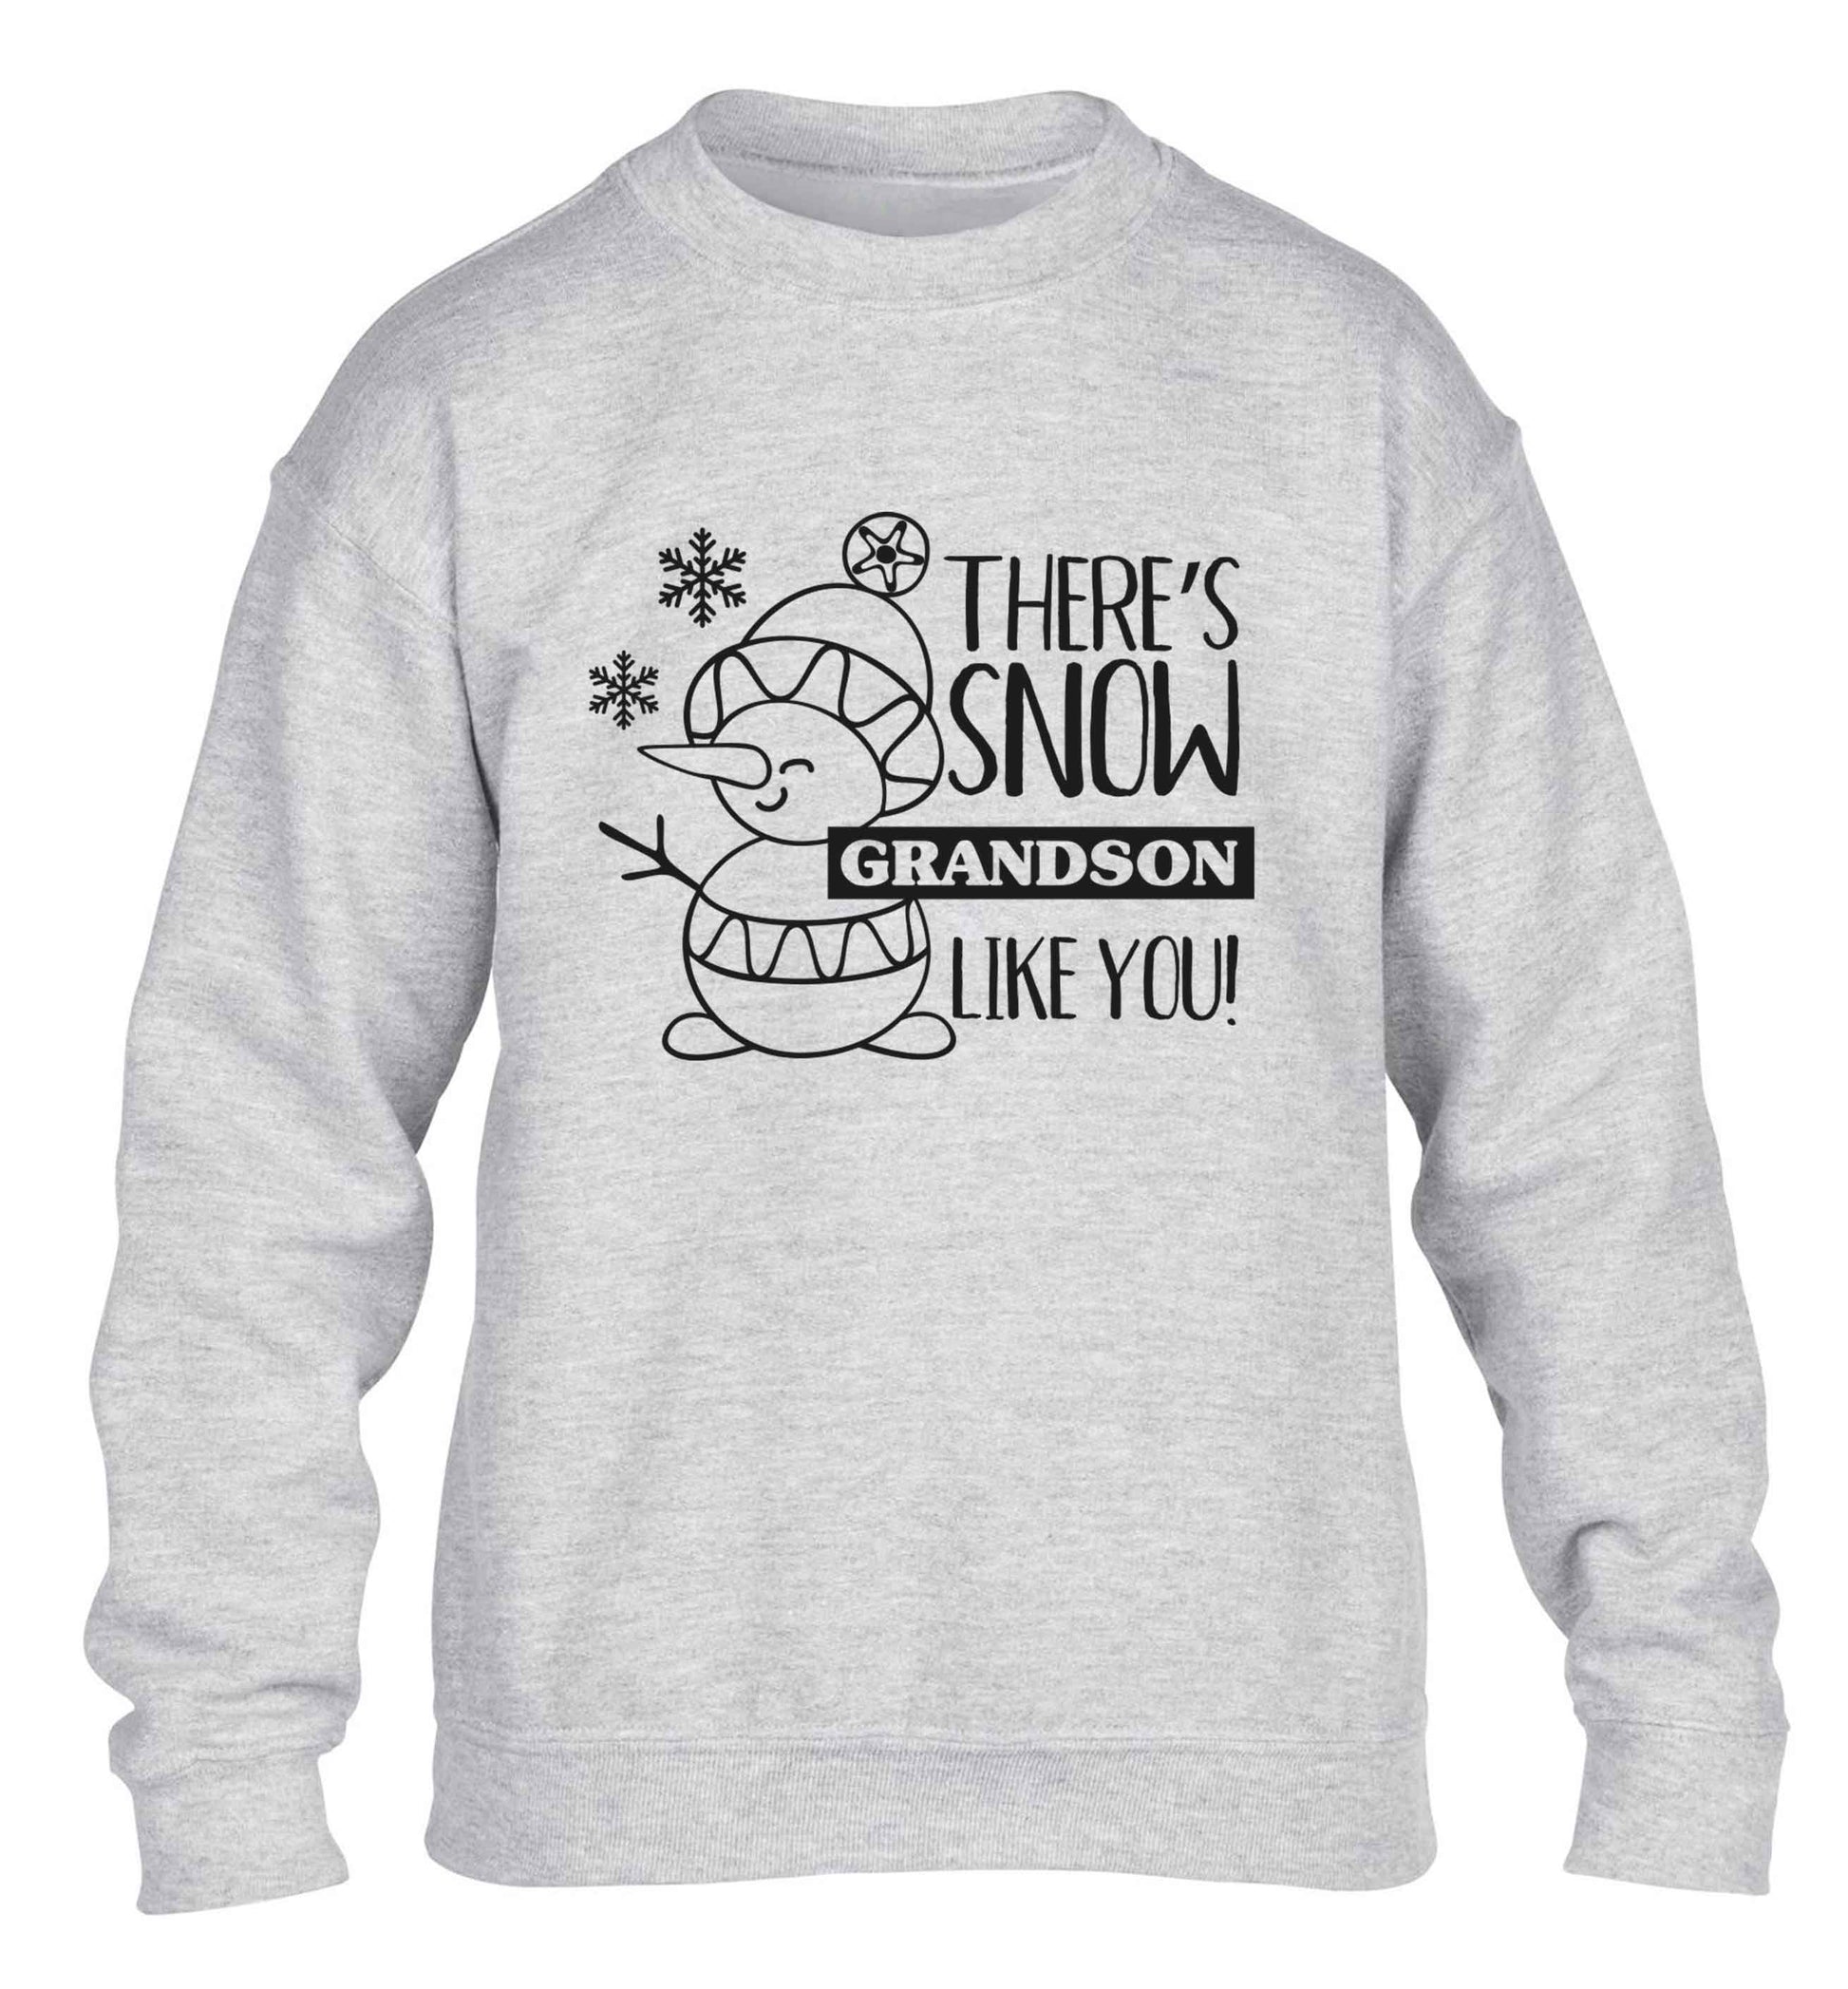 There's snow grandson like you children's grey sweater 12-13 Years